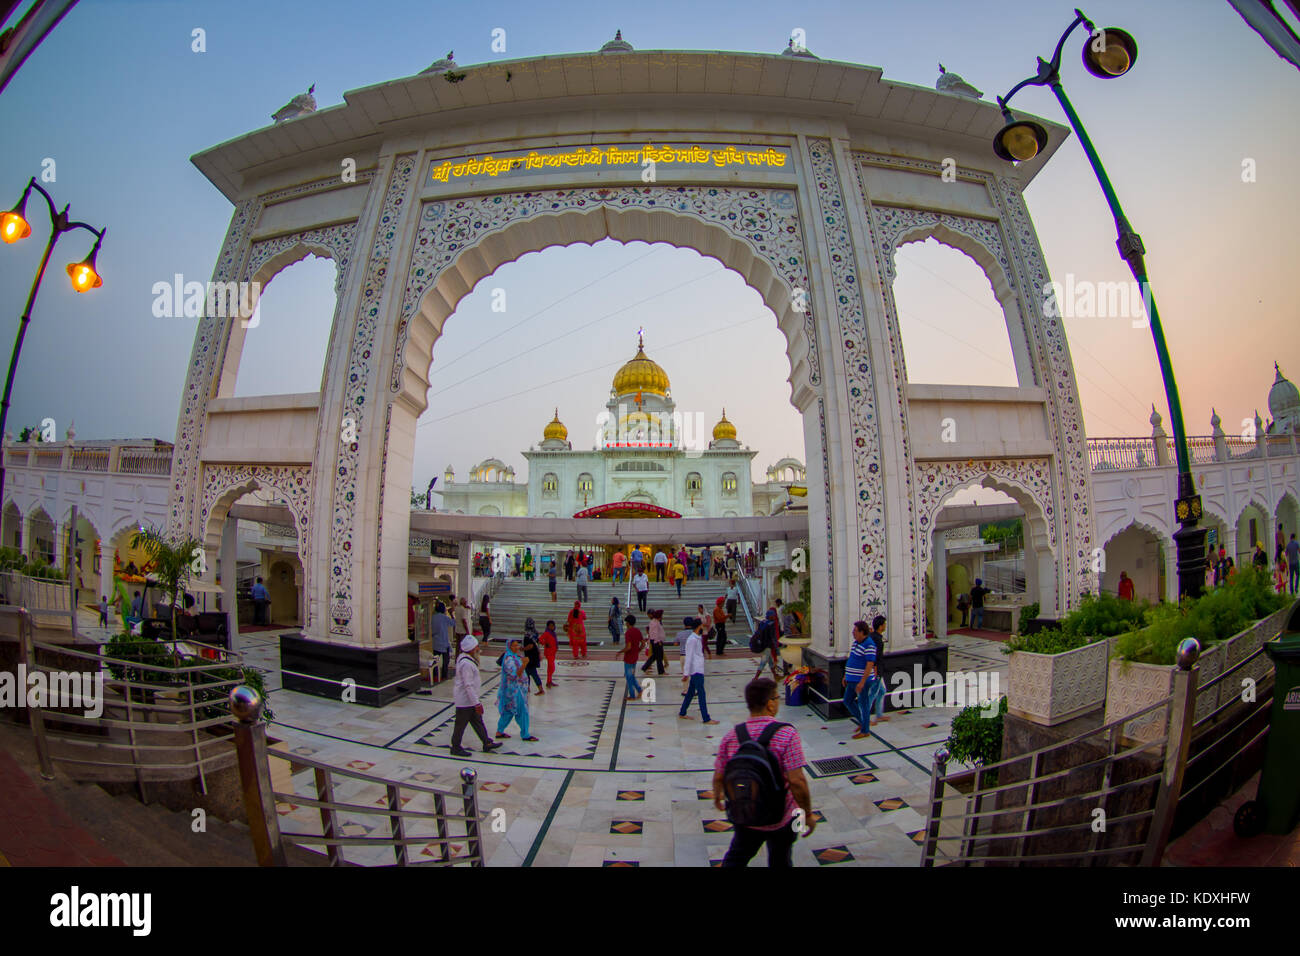 DELHI, INDIA - SEPTEMBER 19, 2017: Unidentified people at the enter in the arch of Gurudwara Bangla Sahib Sikh Temple, in New Delhi, India, fish eye effect Stock Photo